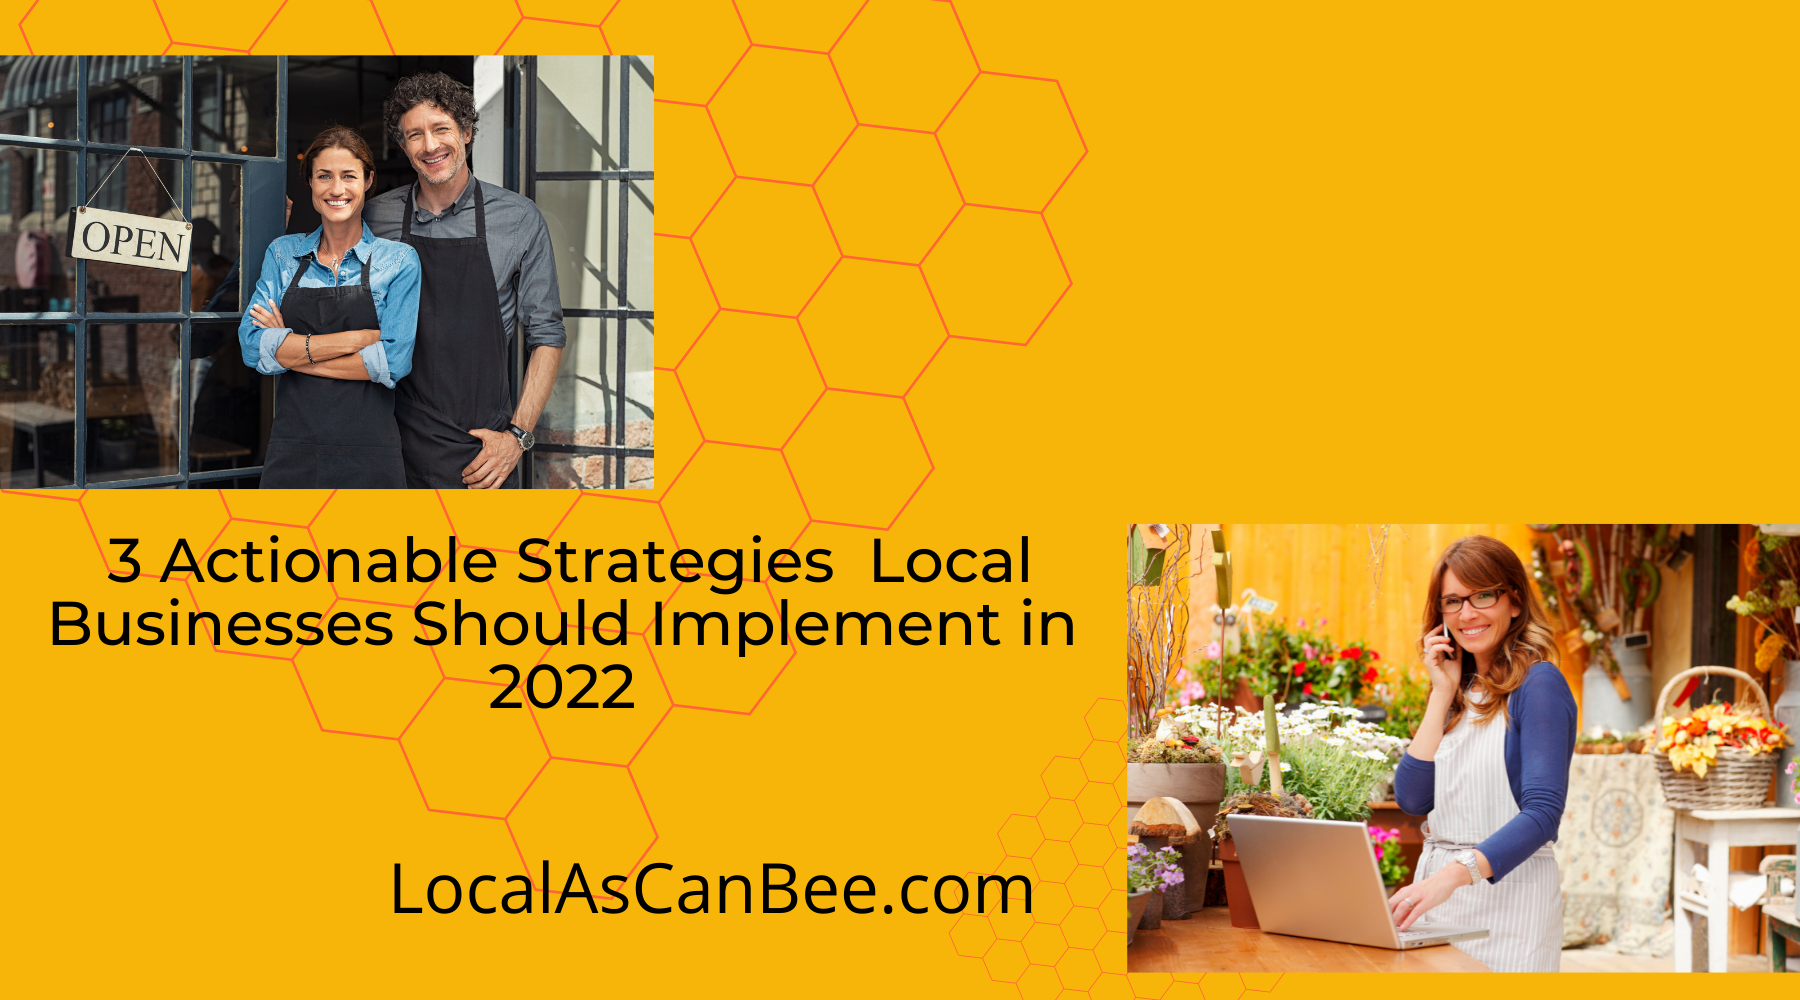 3 Actionable Strategies Local Businesses Should Implement in 2022